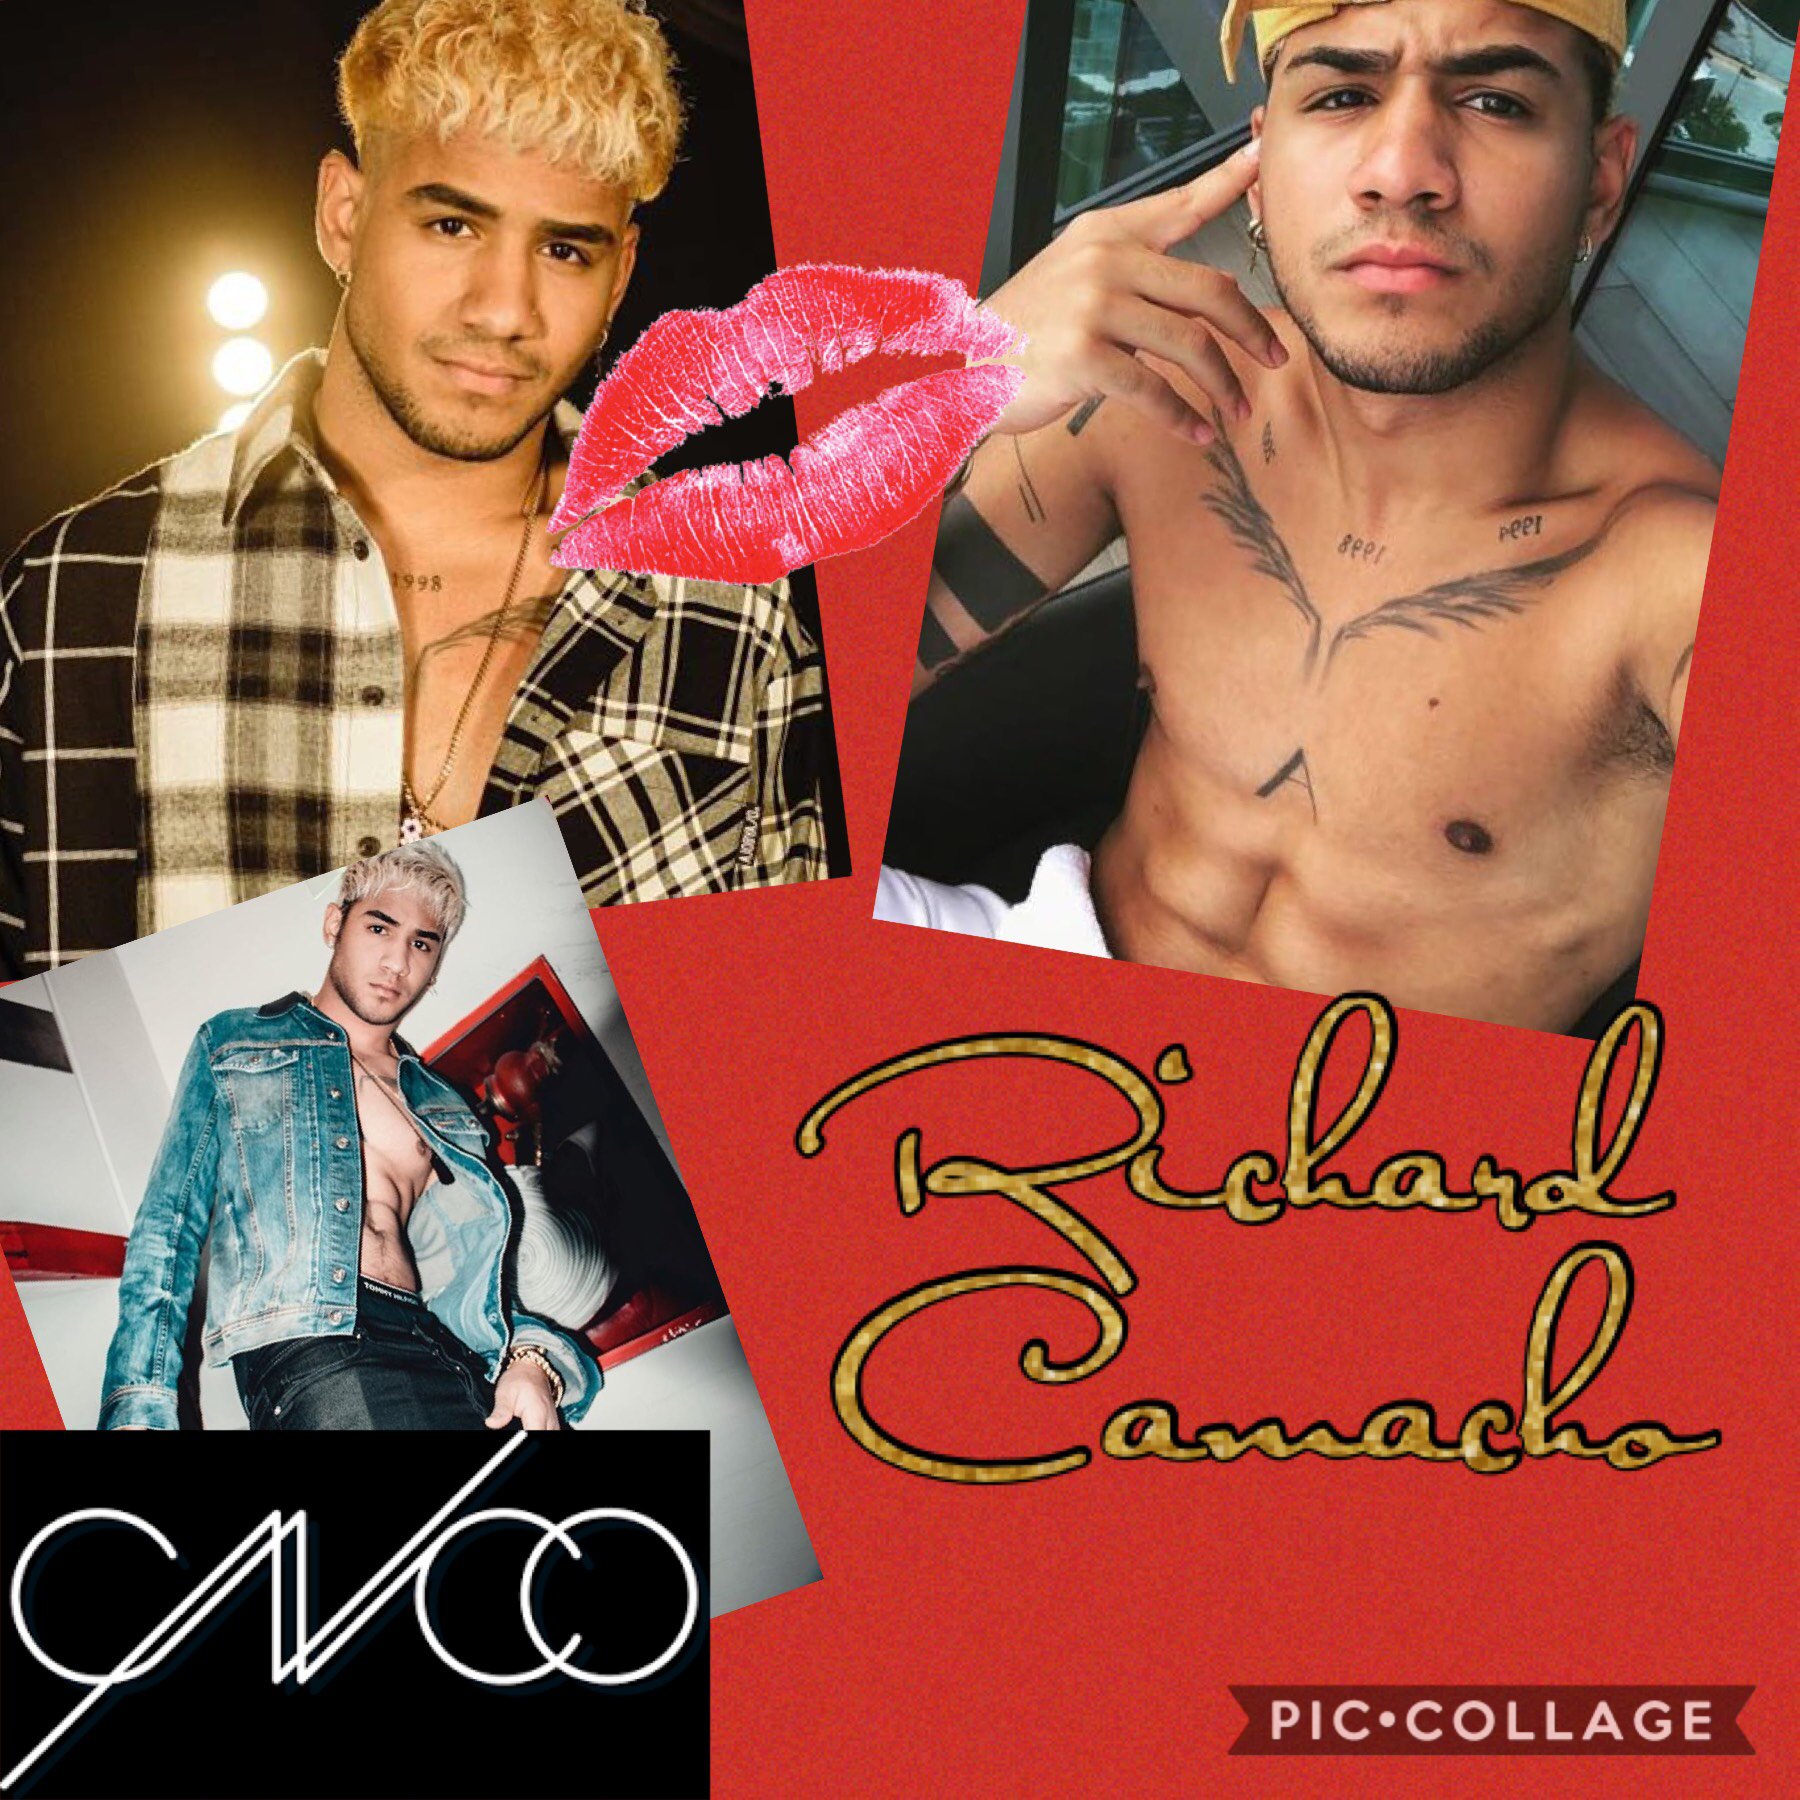 CNCO they’re the best